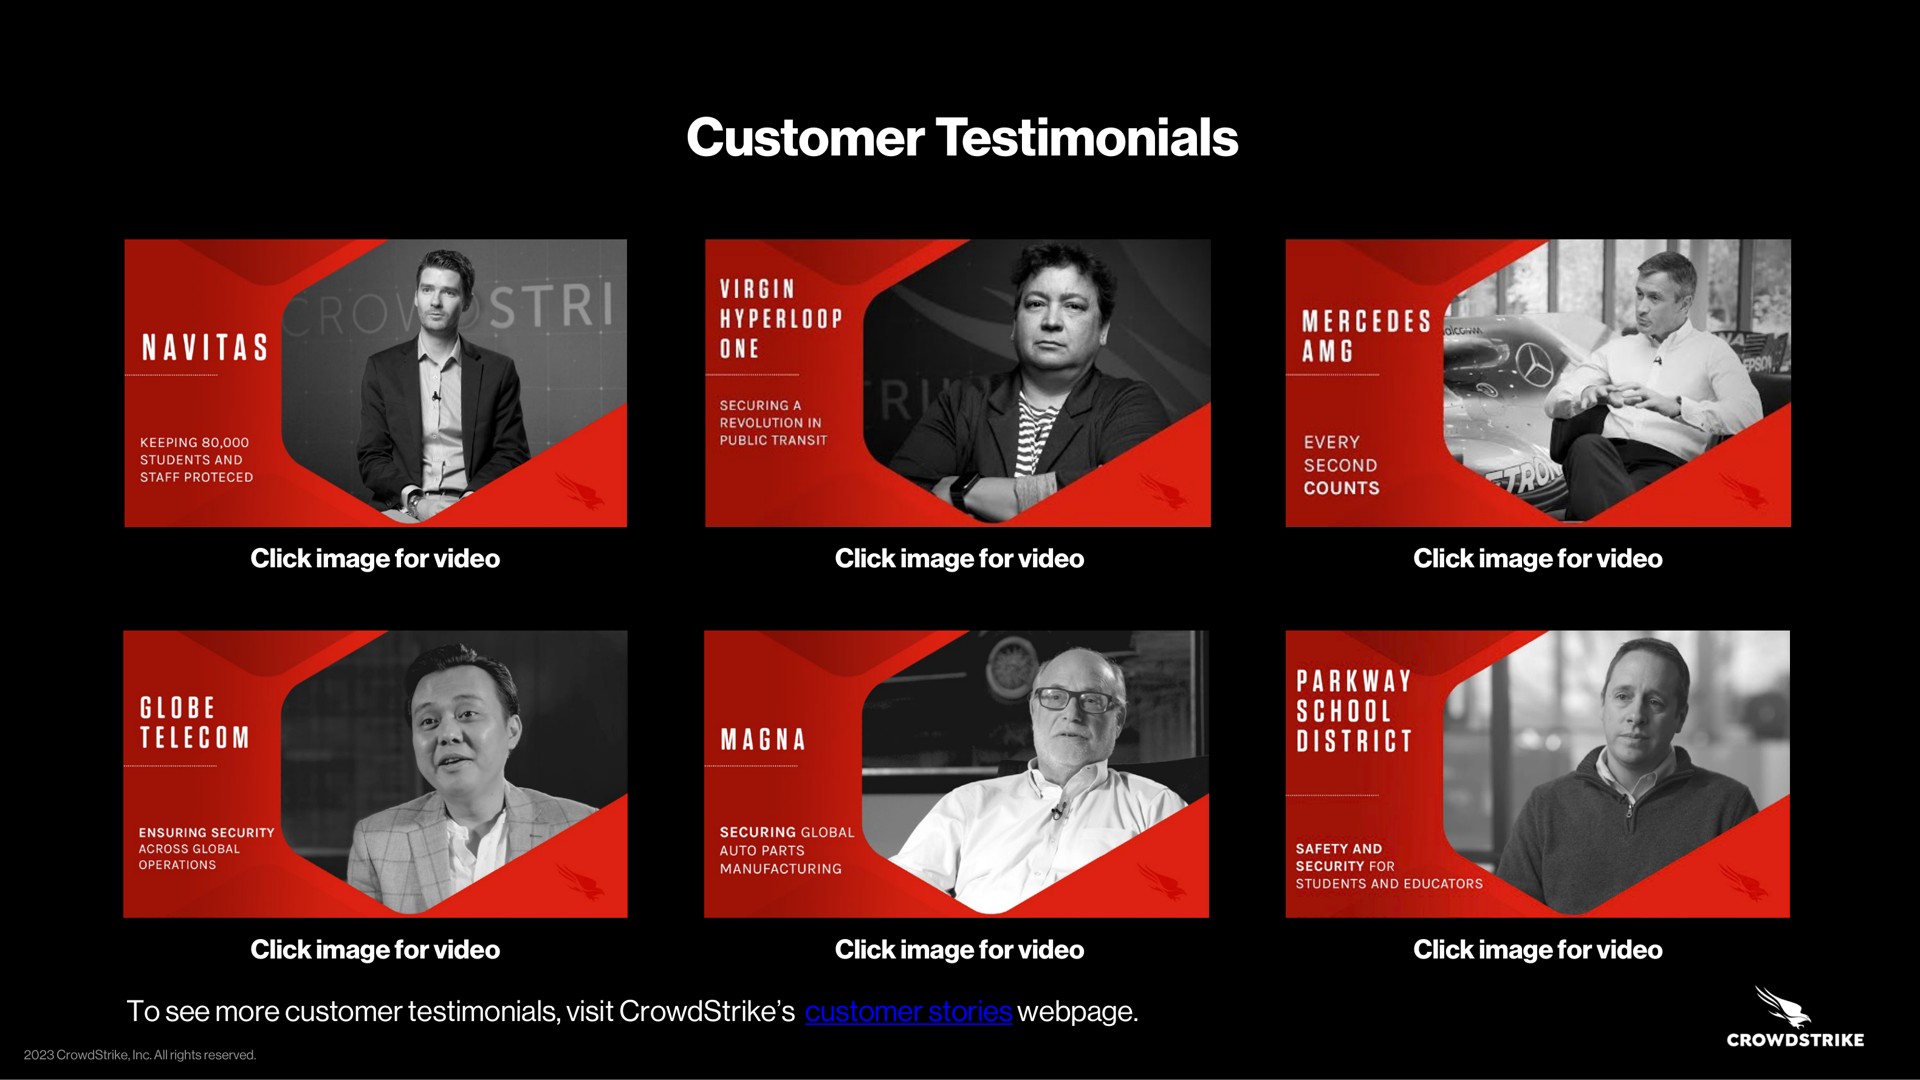 customer testimonials click image for video click image for video click image for video click image for video click image for video click image for video to see more customer testimonials visit customer stories one tae be | Crowdstrike